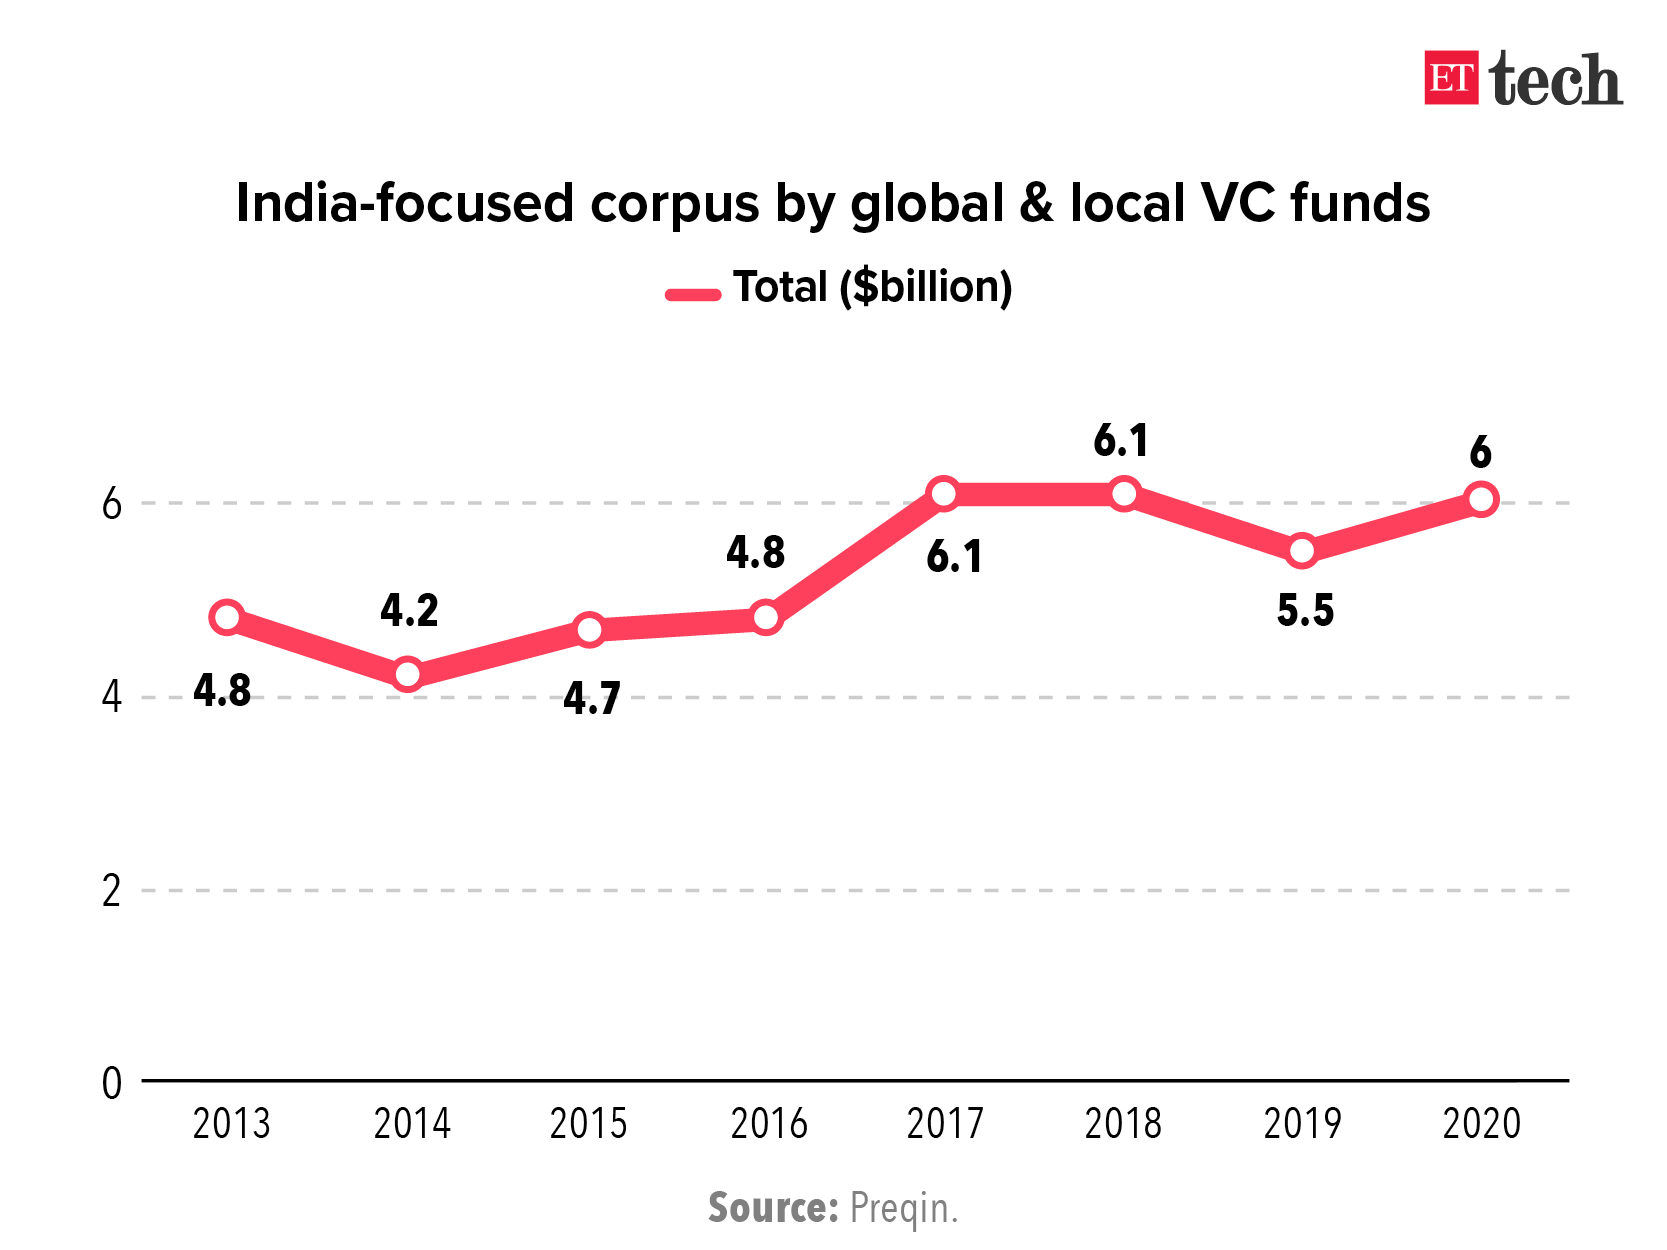 case study on venture capital financing in india